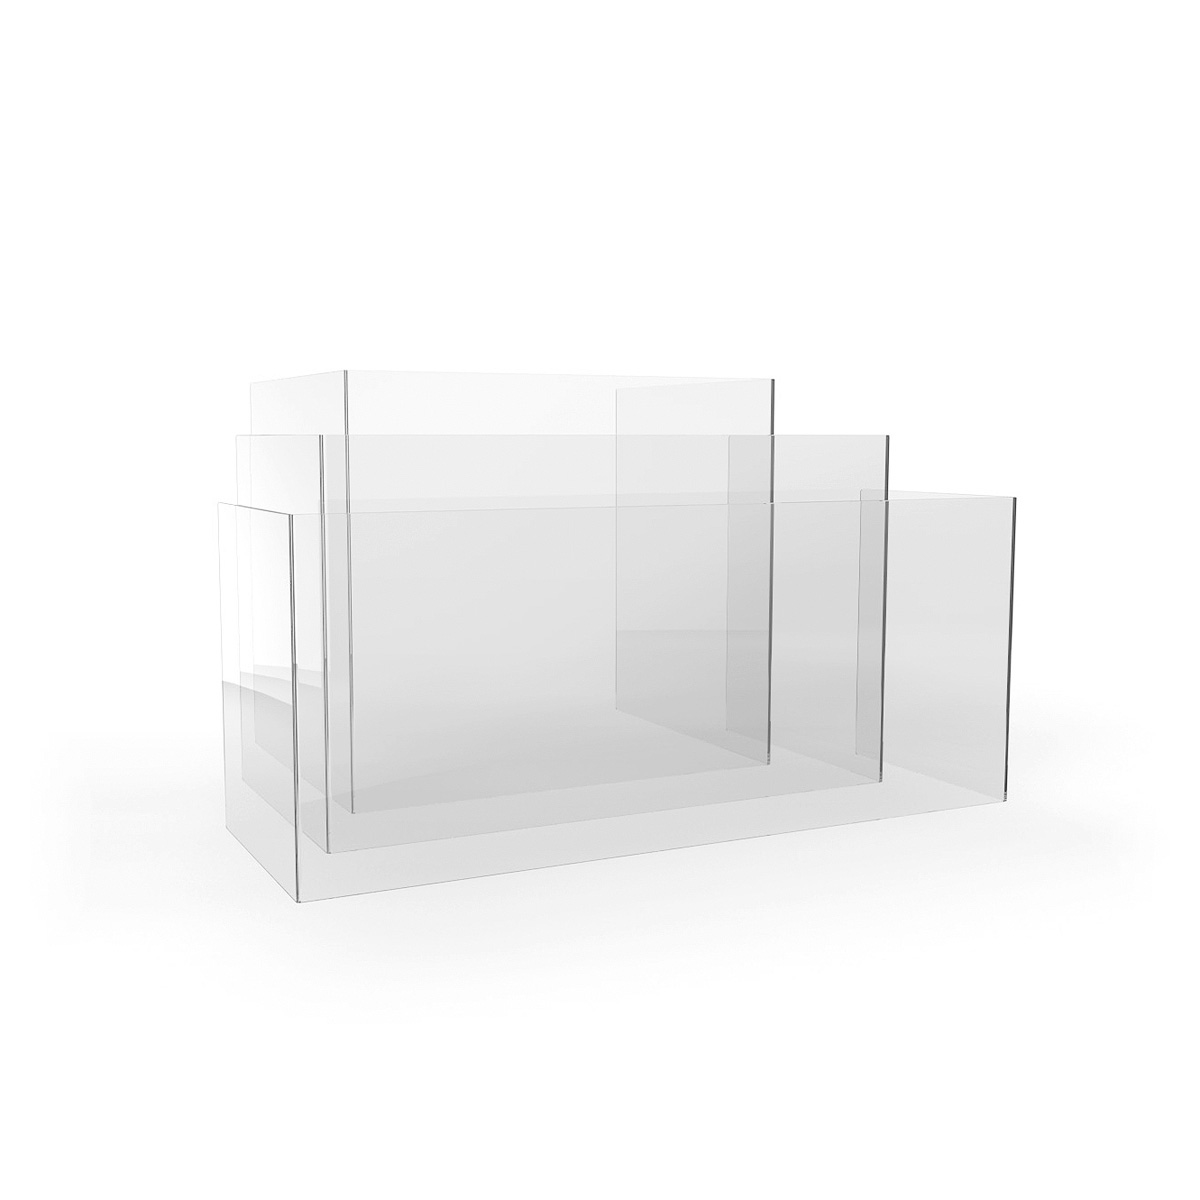 ACHOO® Screen Frameless Perspex Counter Protective Screen IIs Suitable For Use on Reception Counters, Till Areas And Food Service Areas